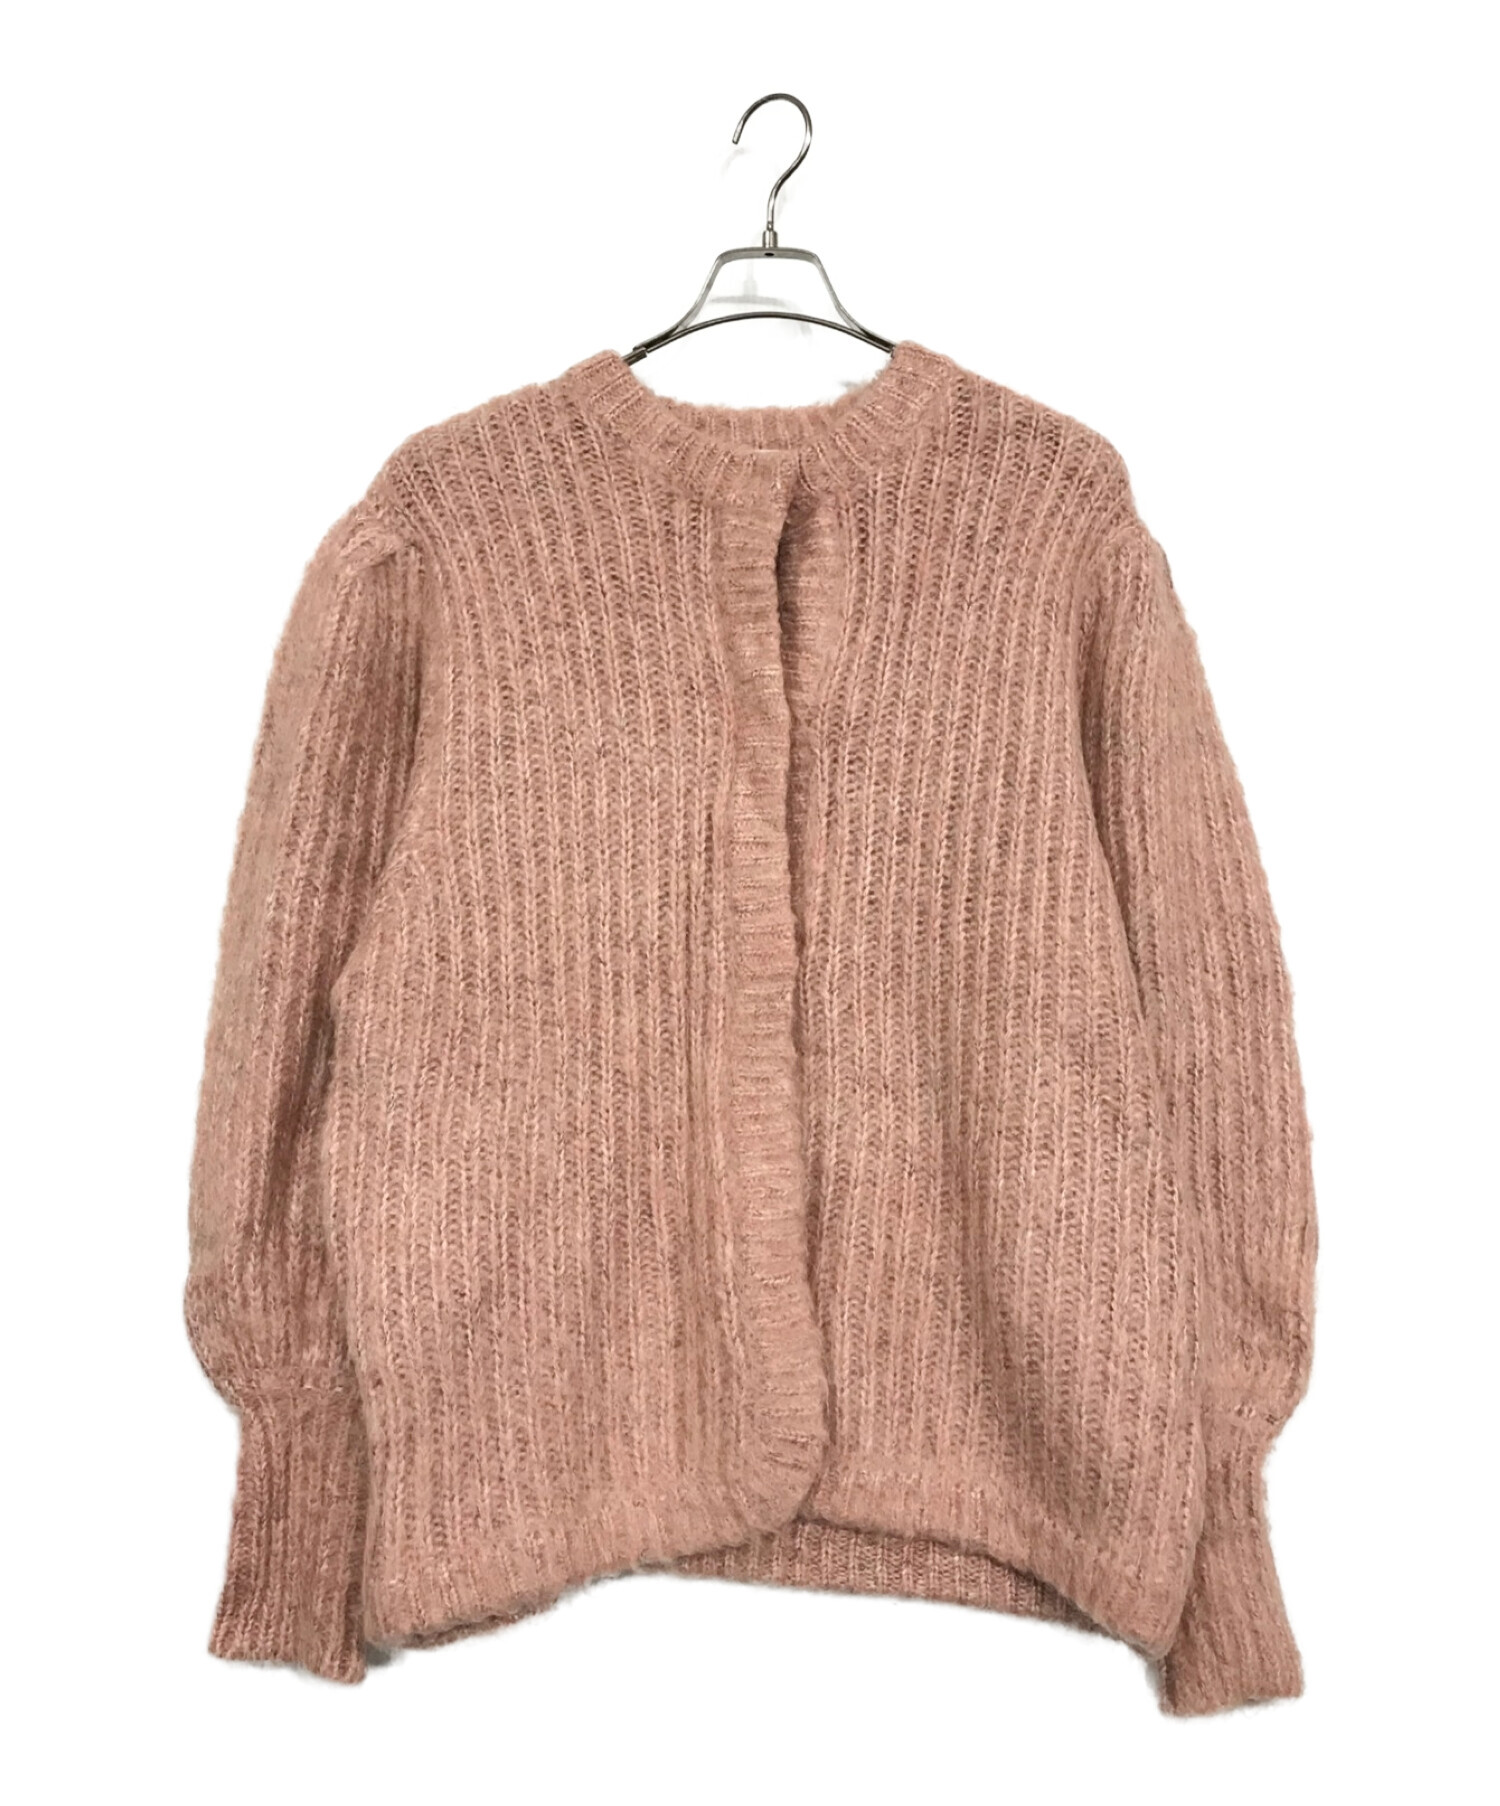 COLOR MOHAIR SHAGGY CARDIGAN pink - カーディガン/ボレロ